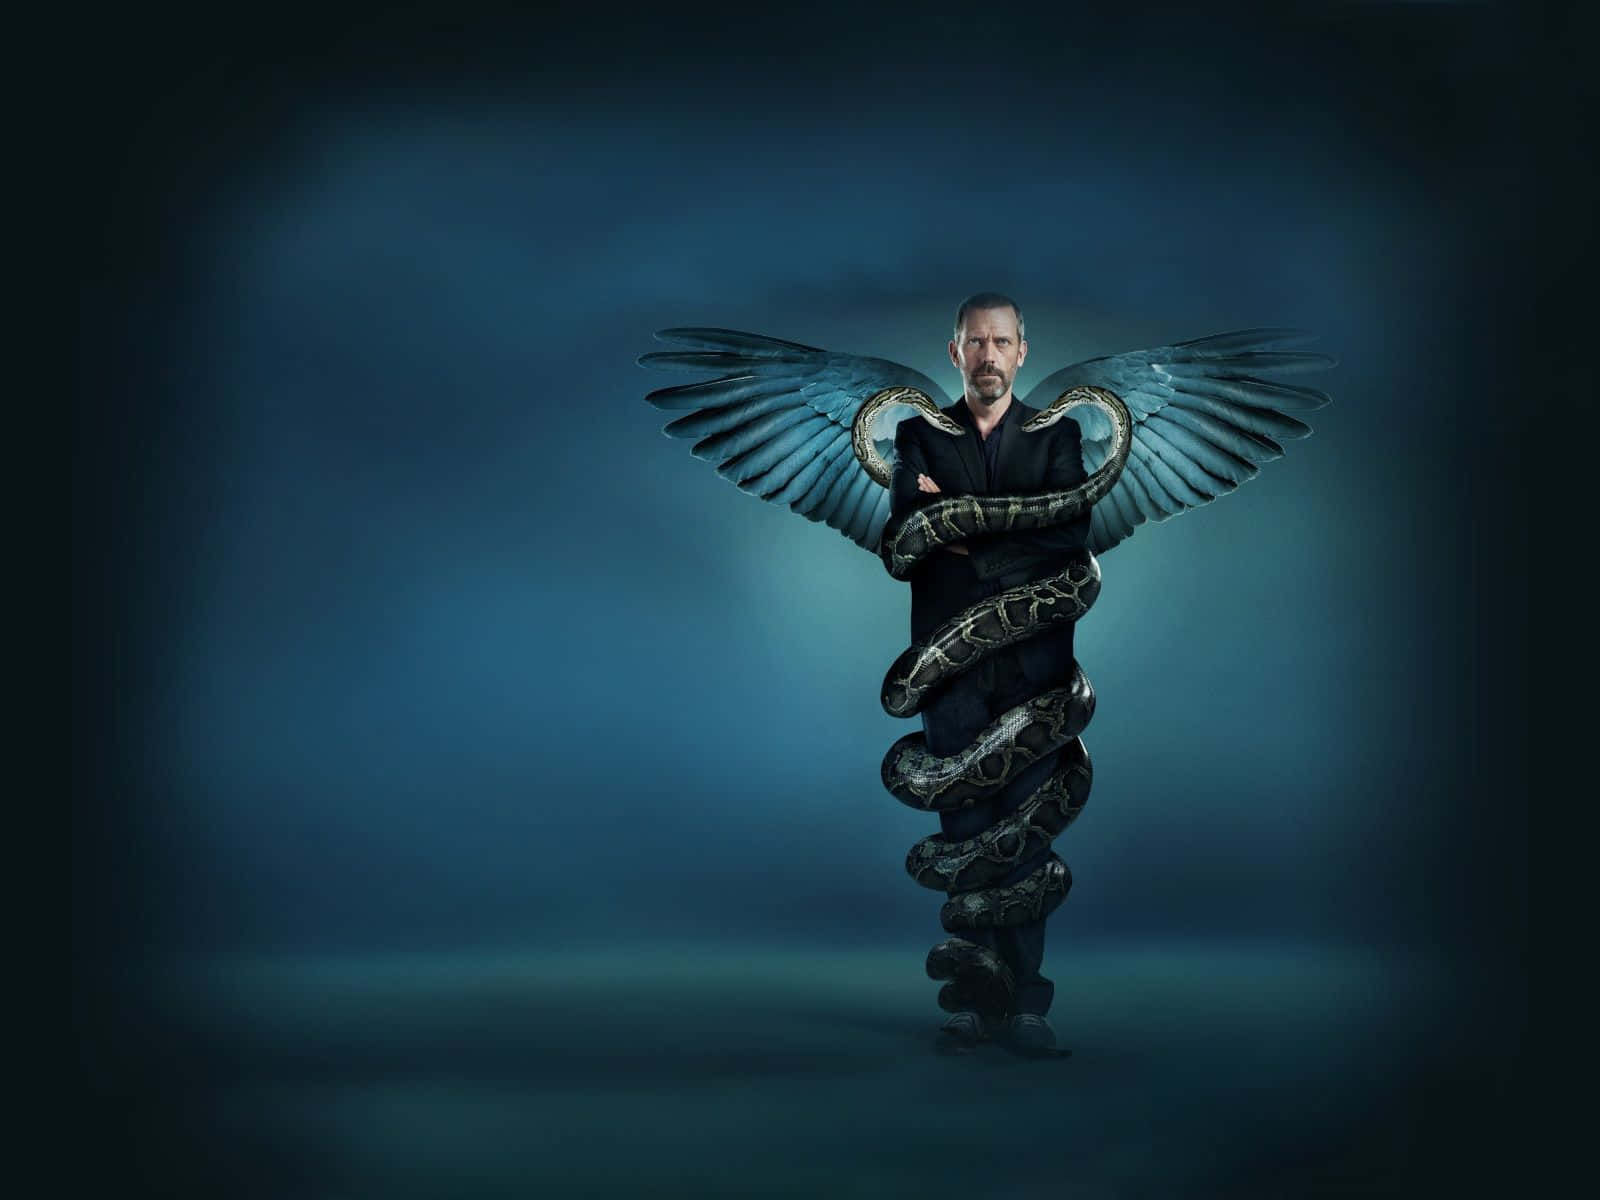 Hd Medical Staff With Wings And Snake Wallpaper